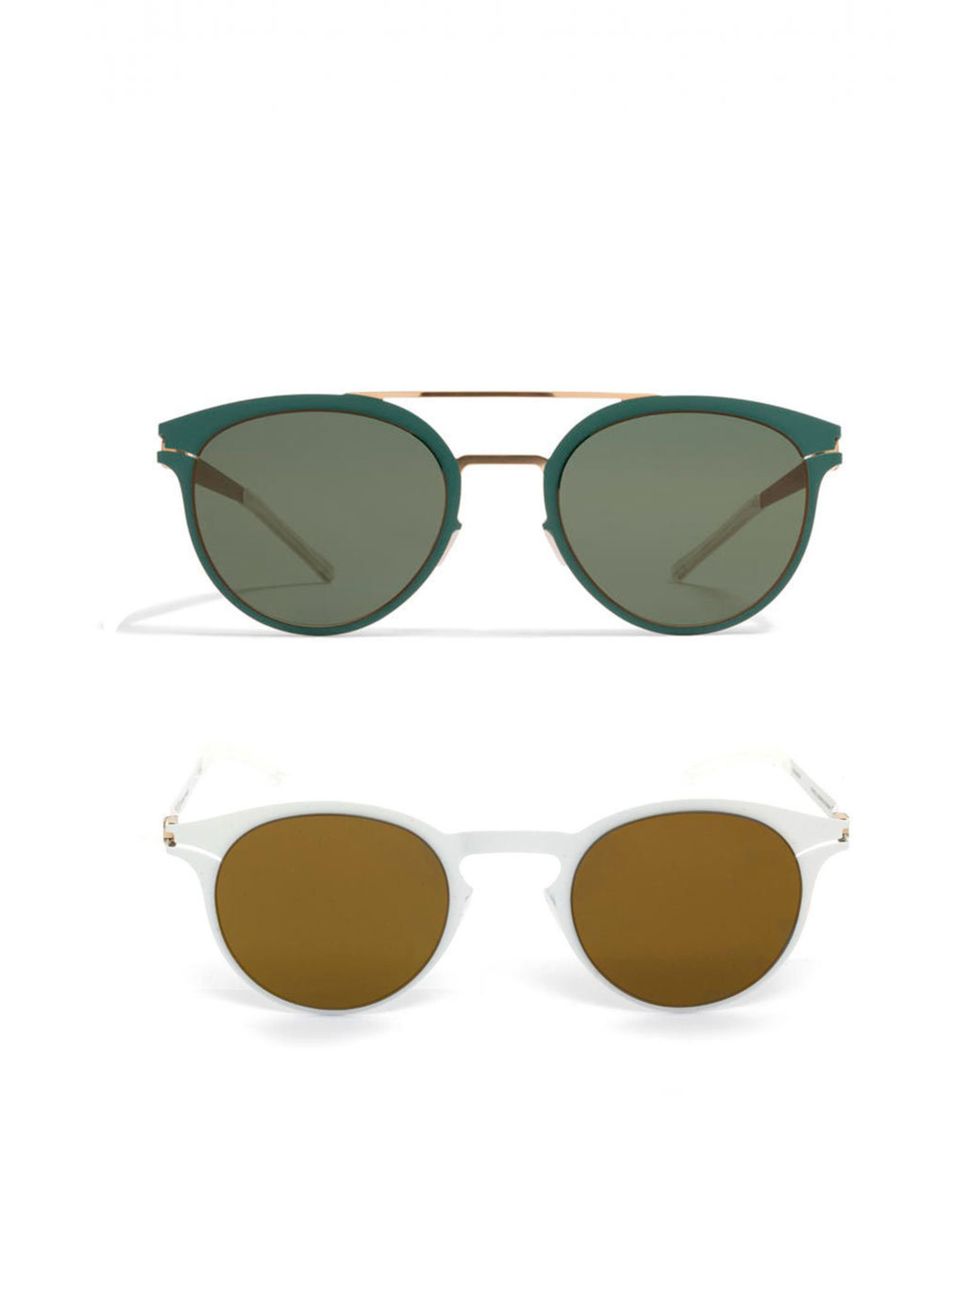 <p><a href="https://mykita.com/en/sun">Mykita</a></p><p>The sixties shapes of these make them the perfect choice for anyone looking for a bit of retro charm. They tick the mirrored-lense trend box too.</p>